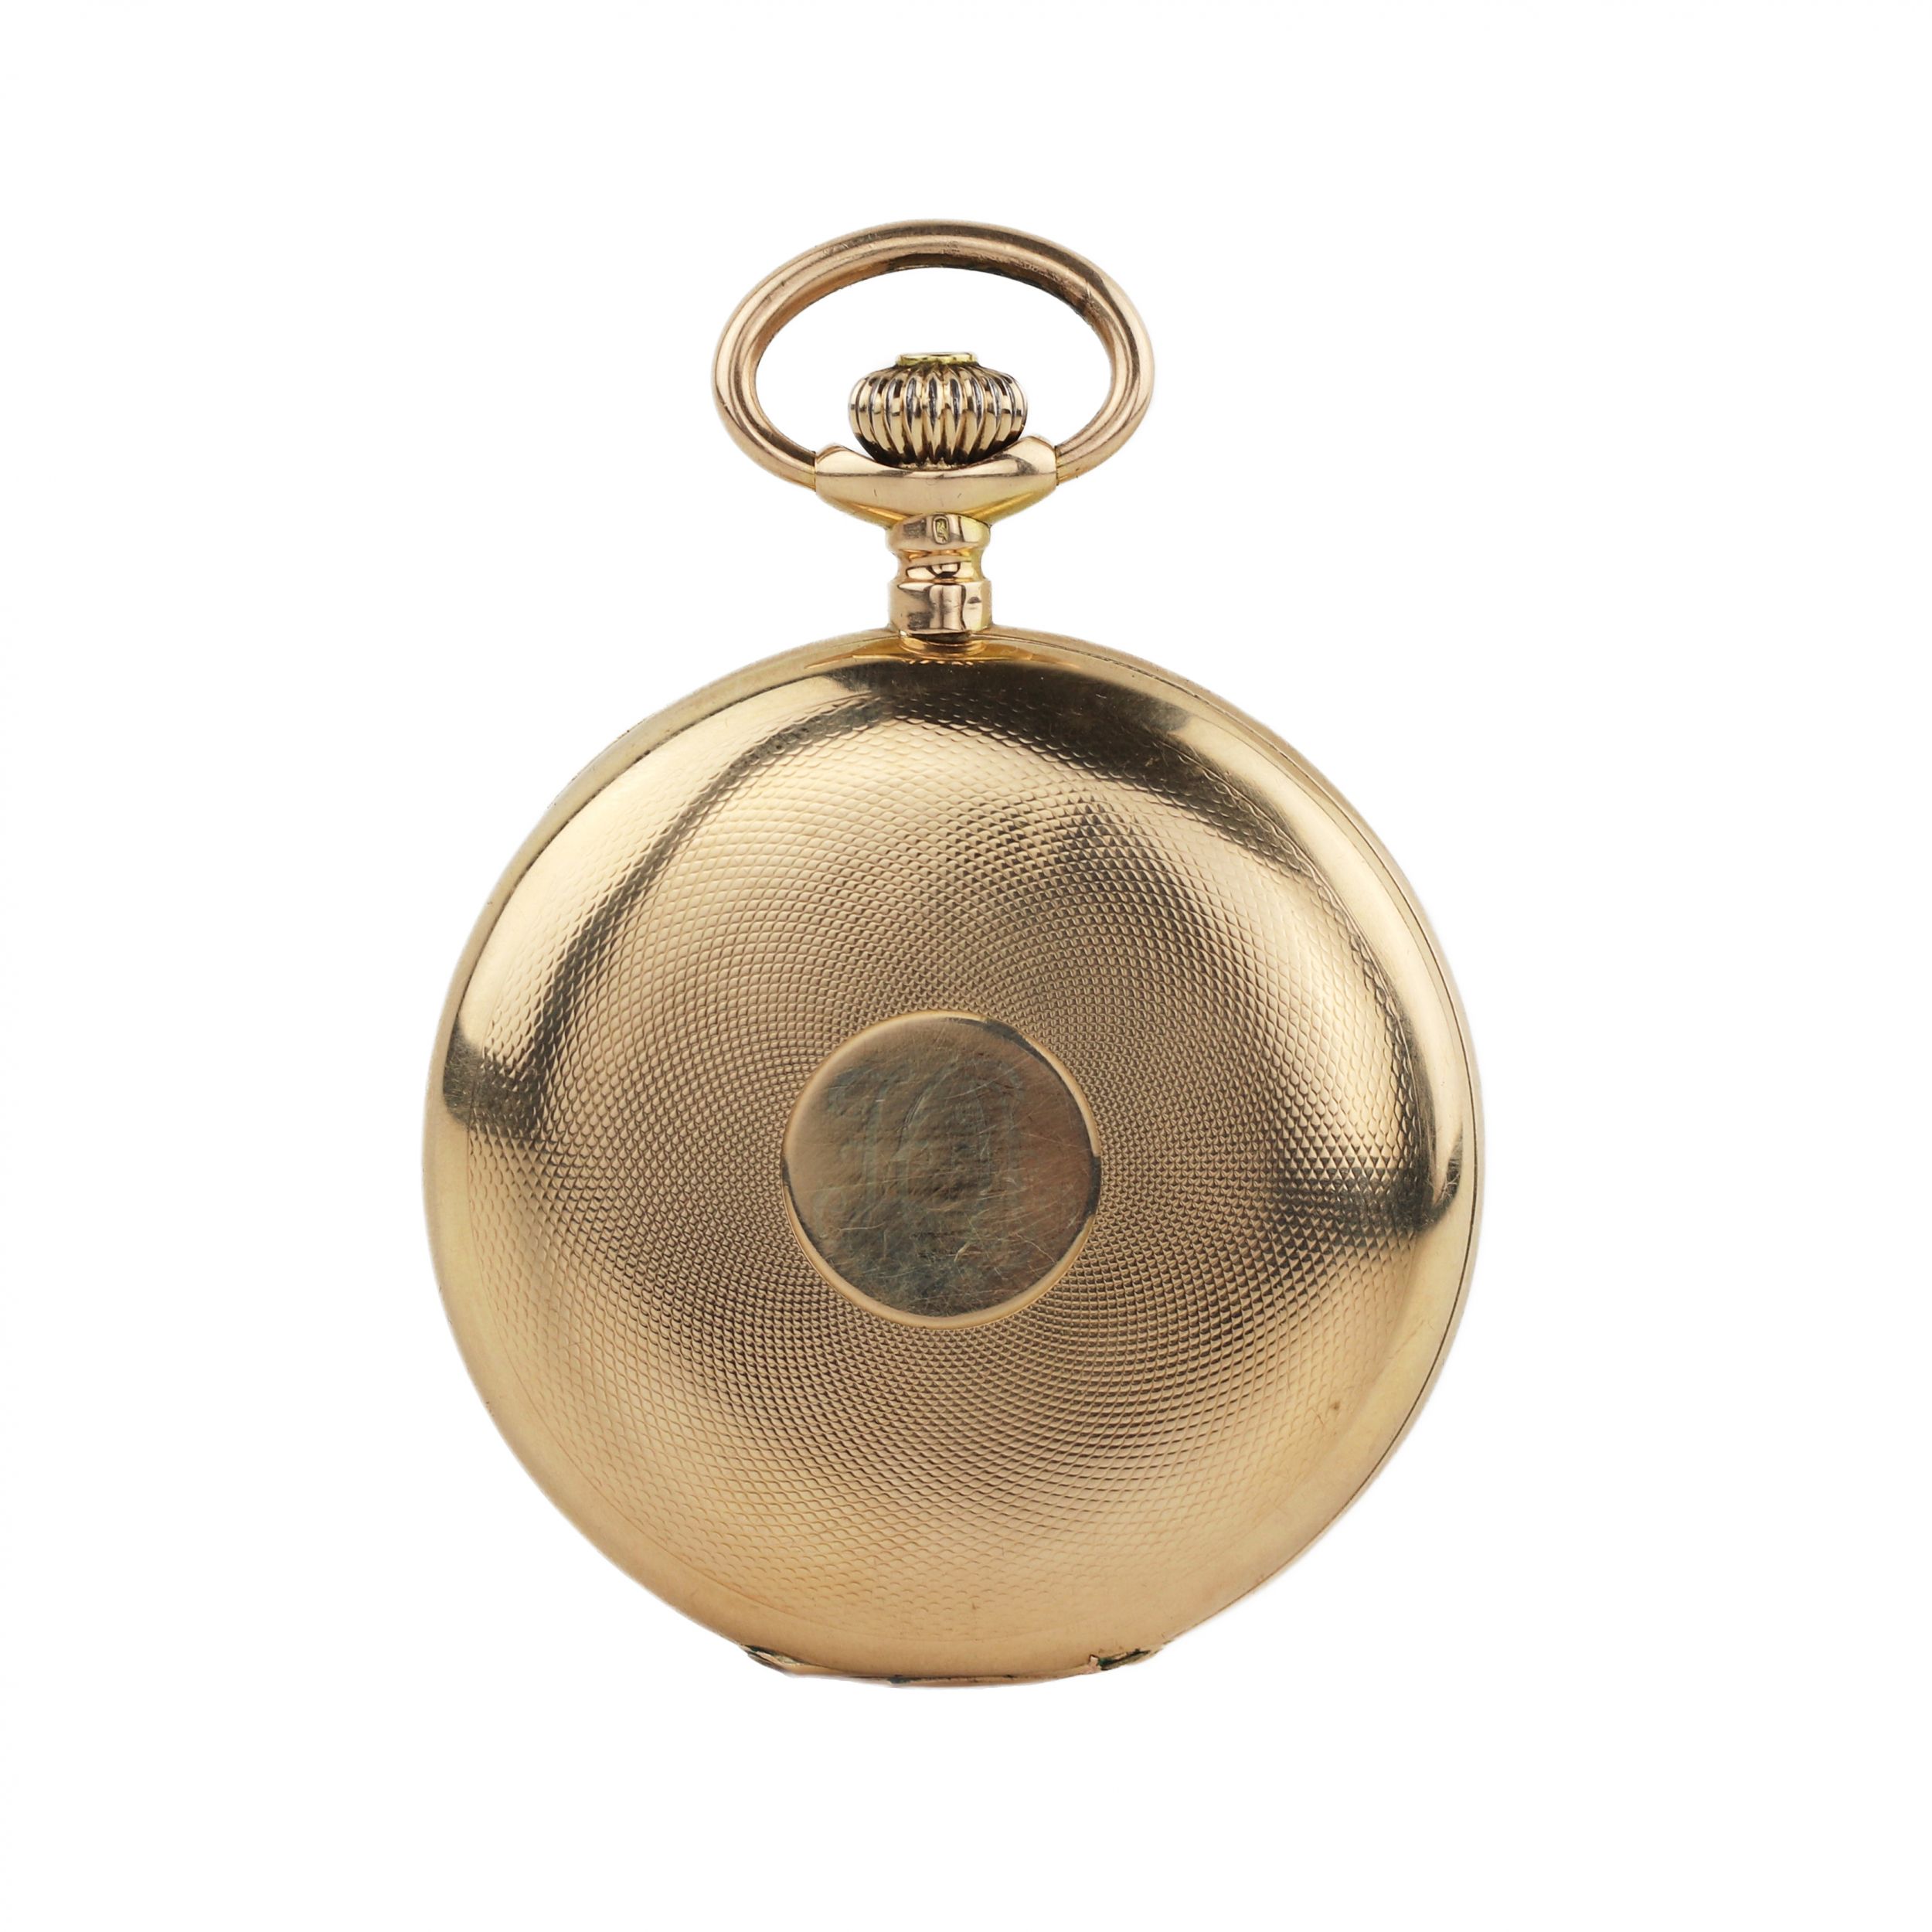 Russian, gold, pocket watch of the pre-revolutionary company F. Winter. - Image 3 of 10